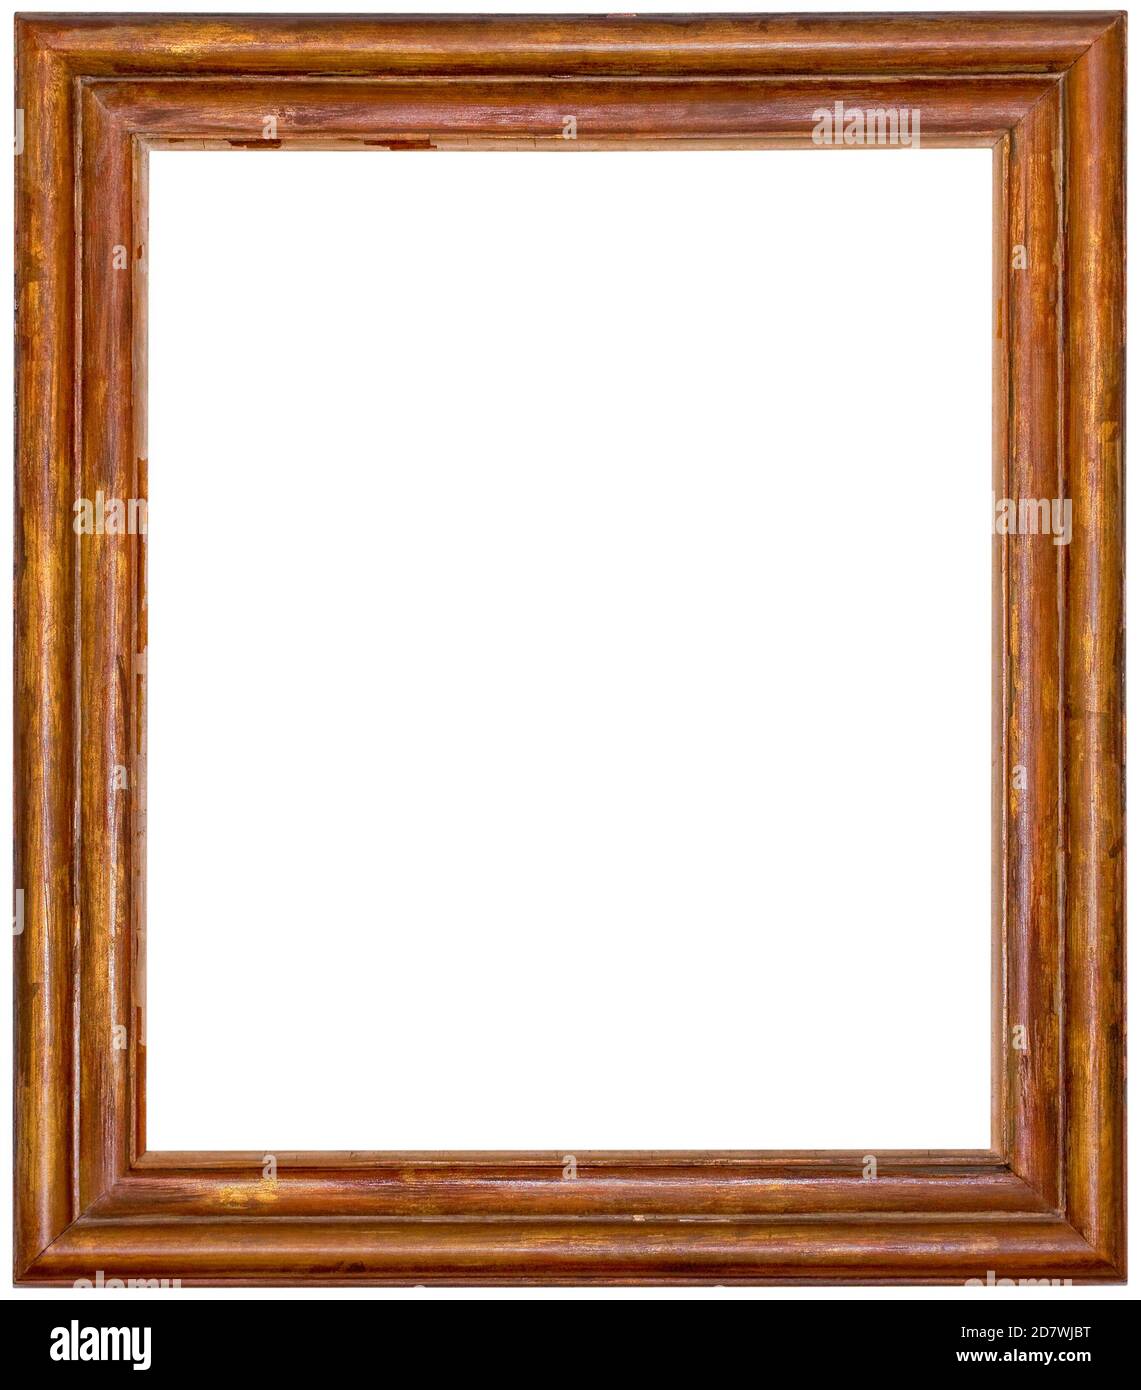 Old Worn Wooden Vintage Picture Frame Cutout Stock Photo